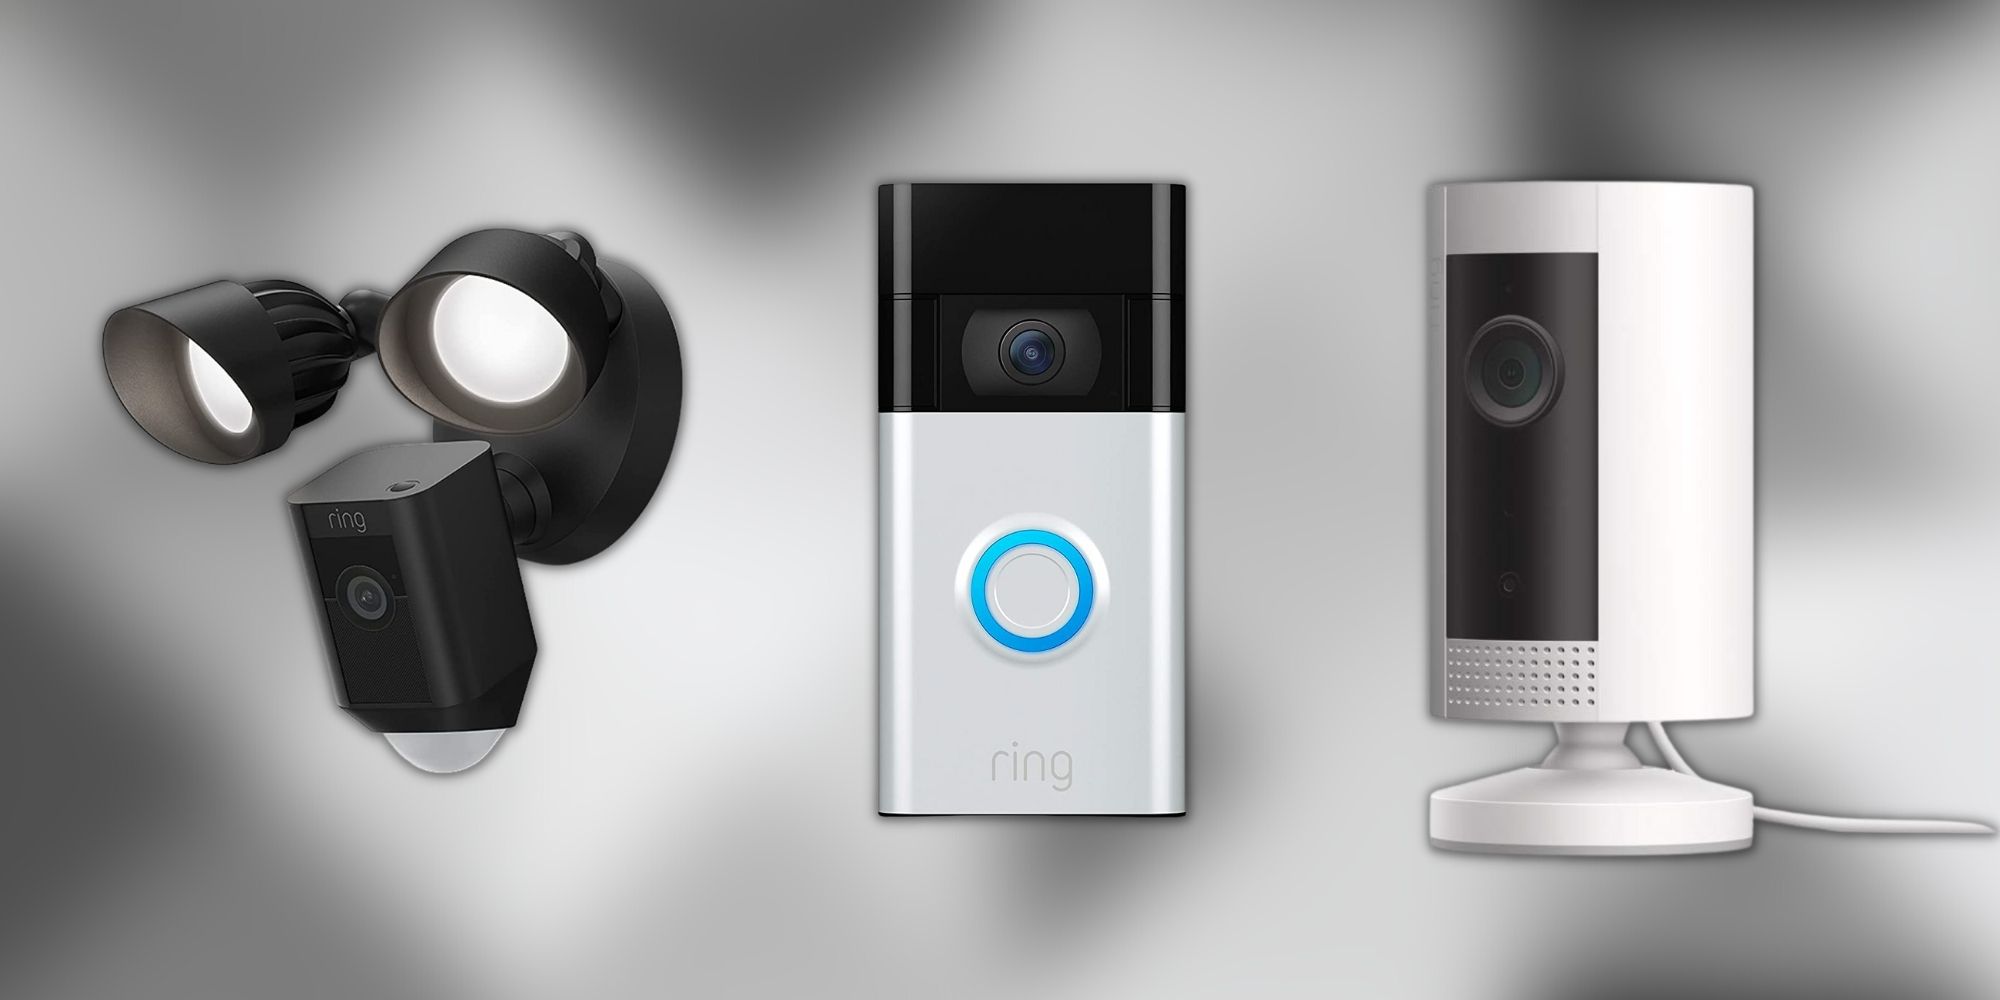 Ring home security cameras